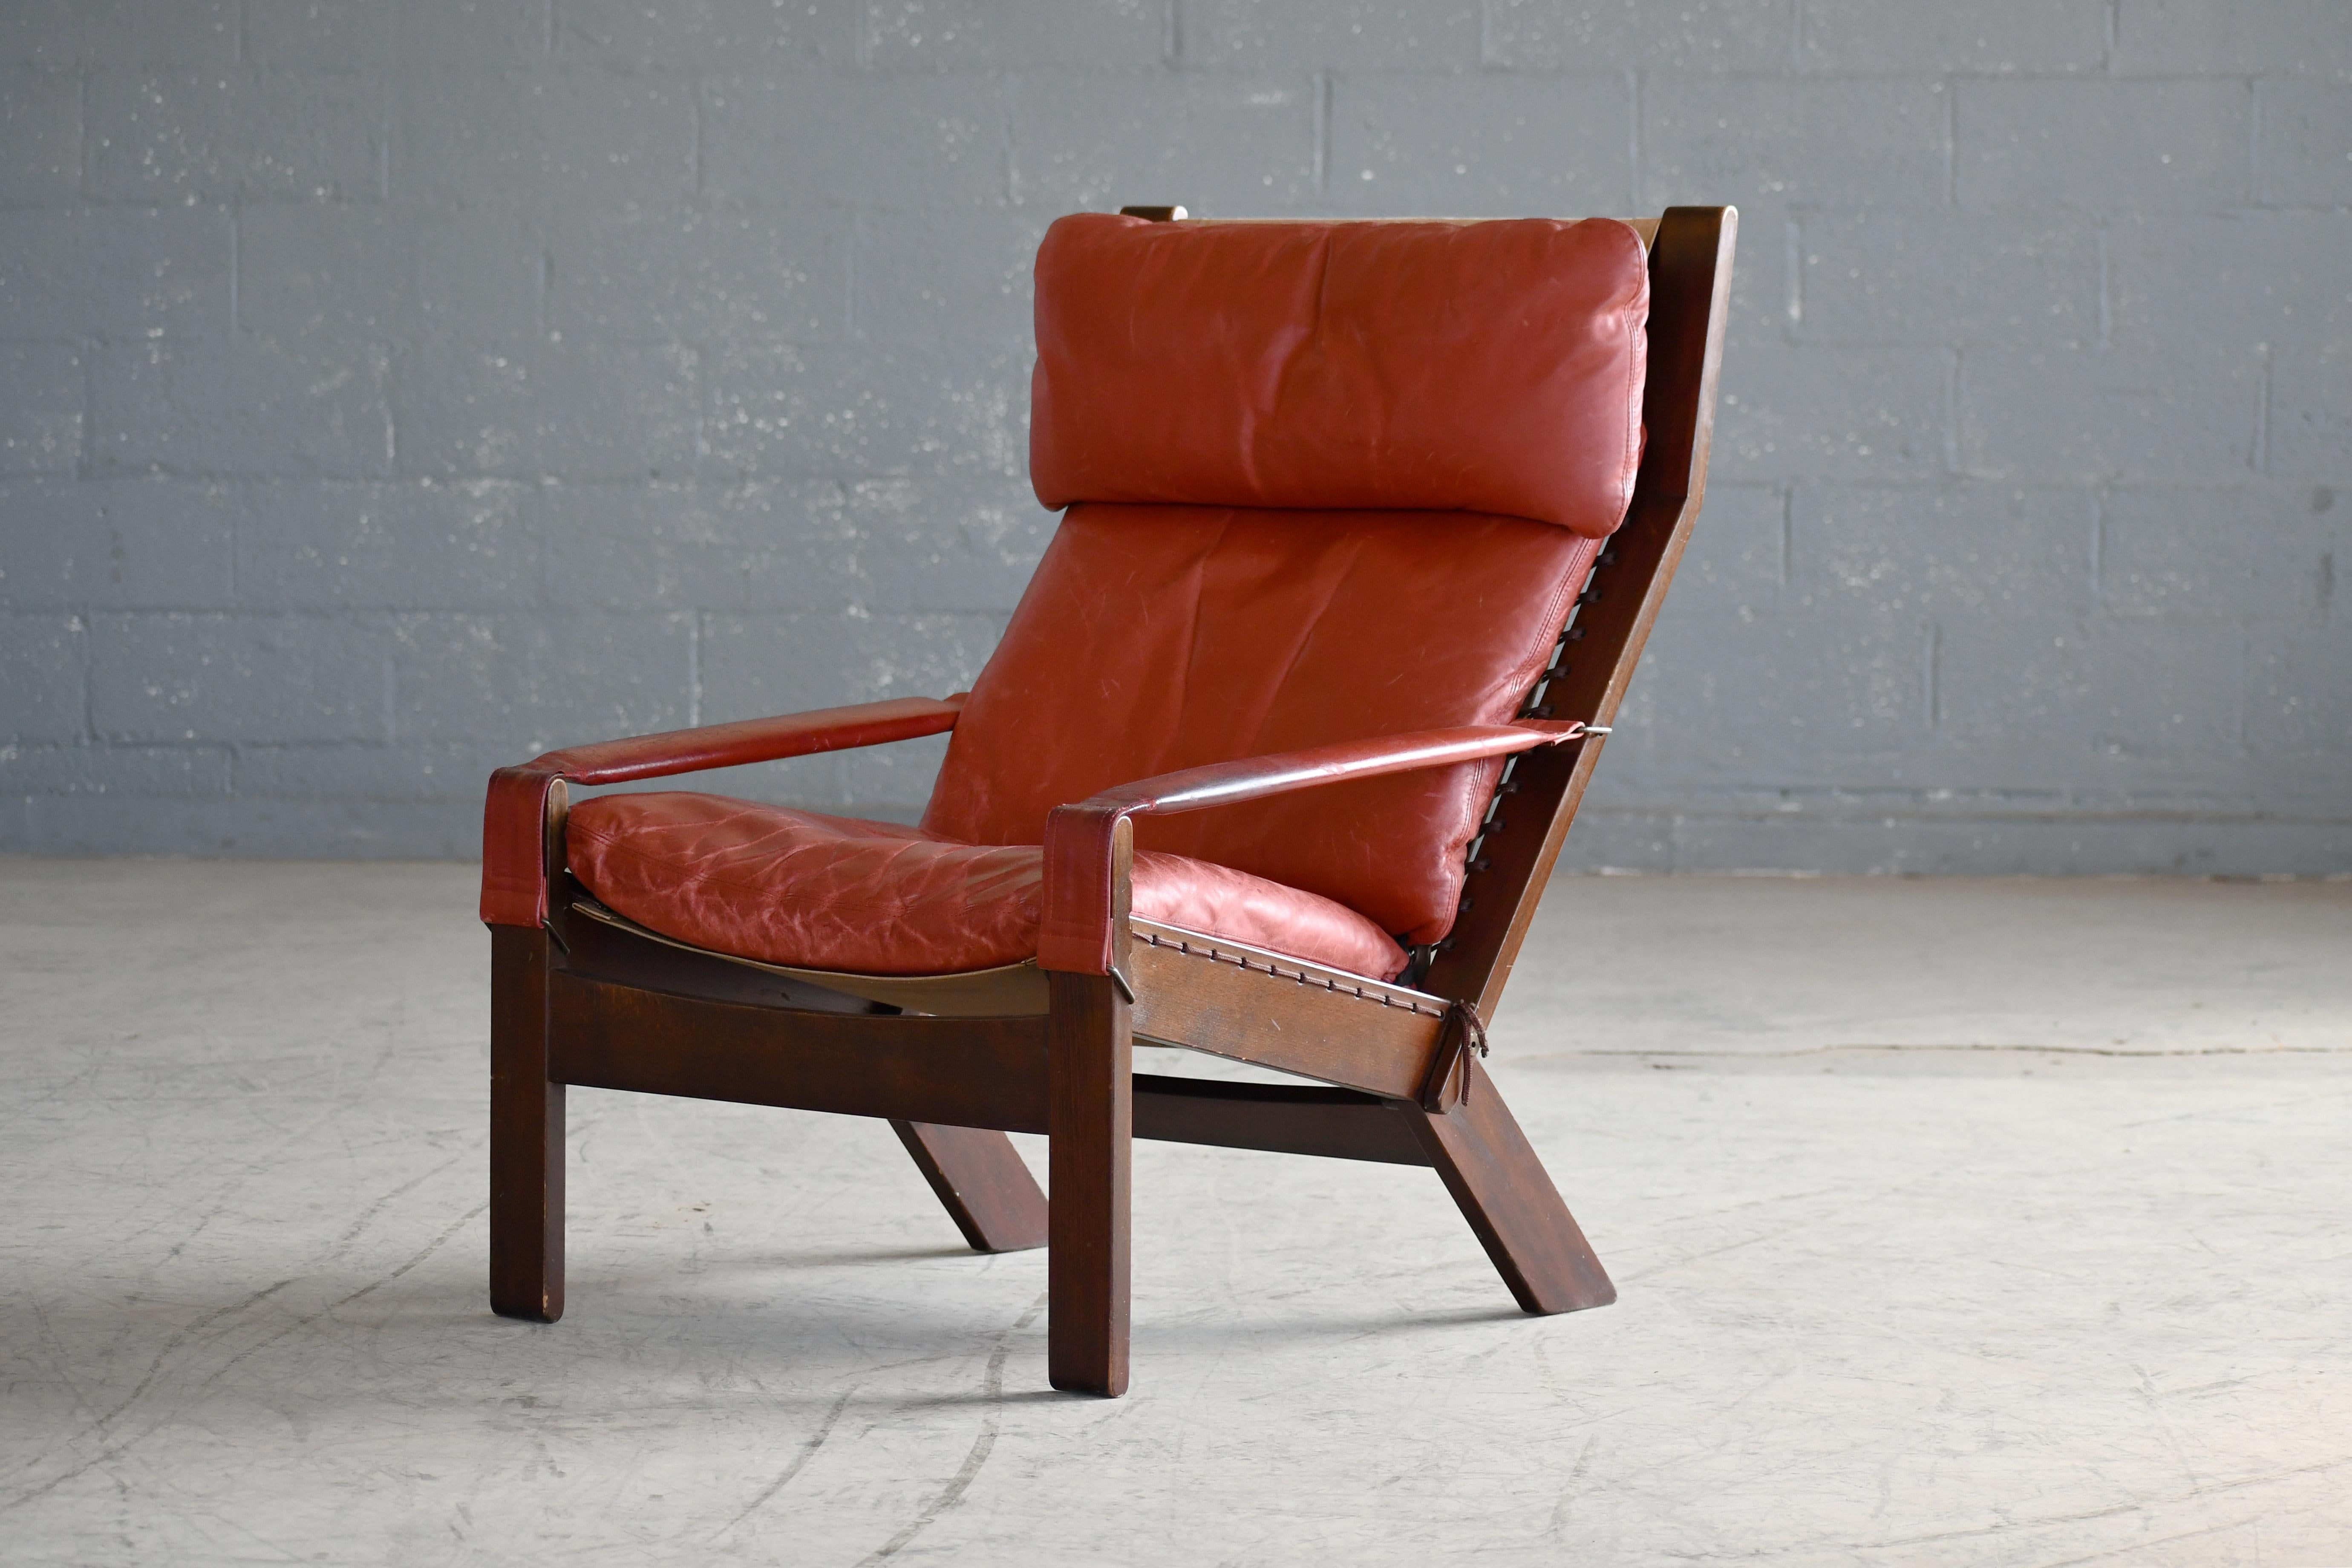 Scandinavian Modern Highback Safari Style Lounge Chair by Torbjorn Afdal in Brick Red Leather